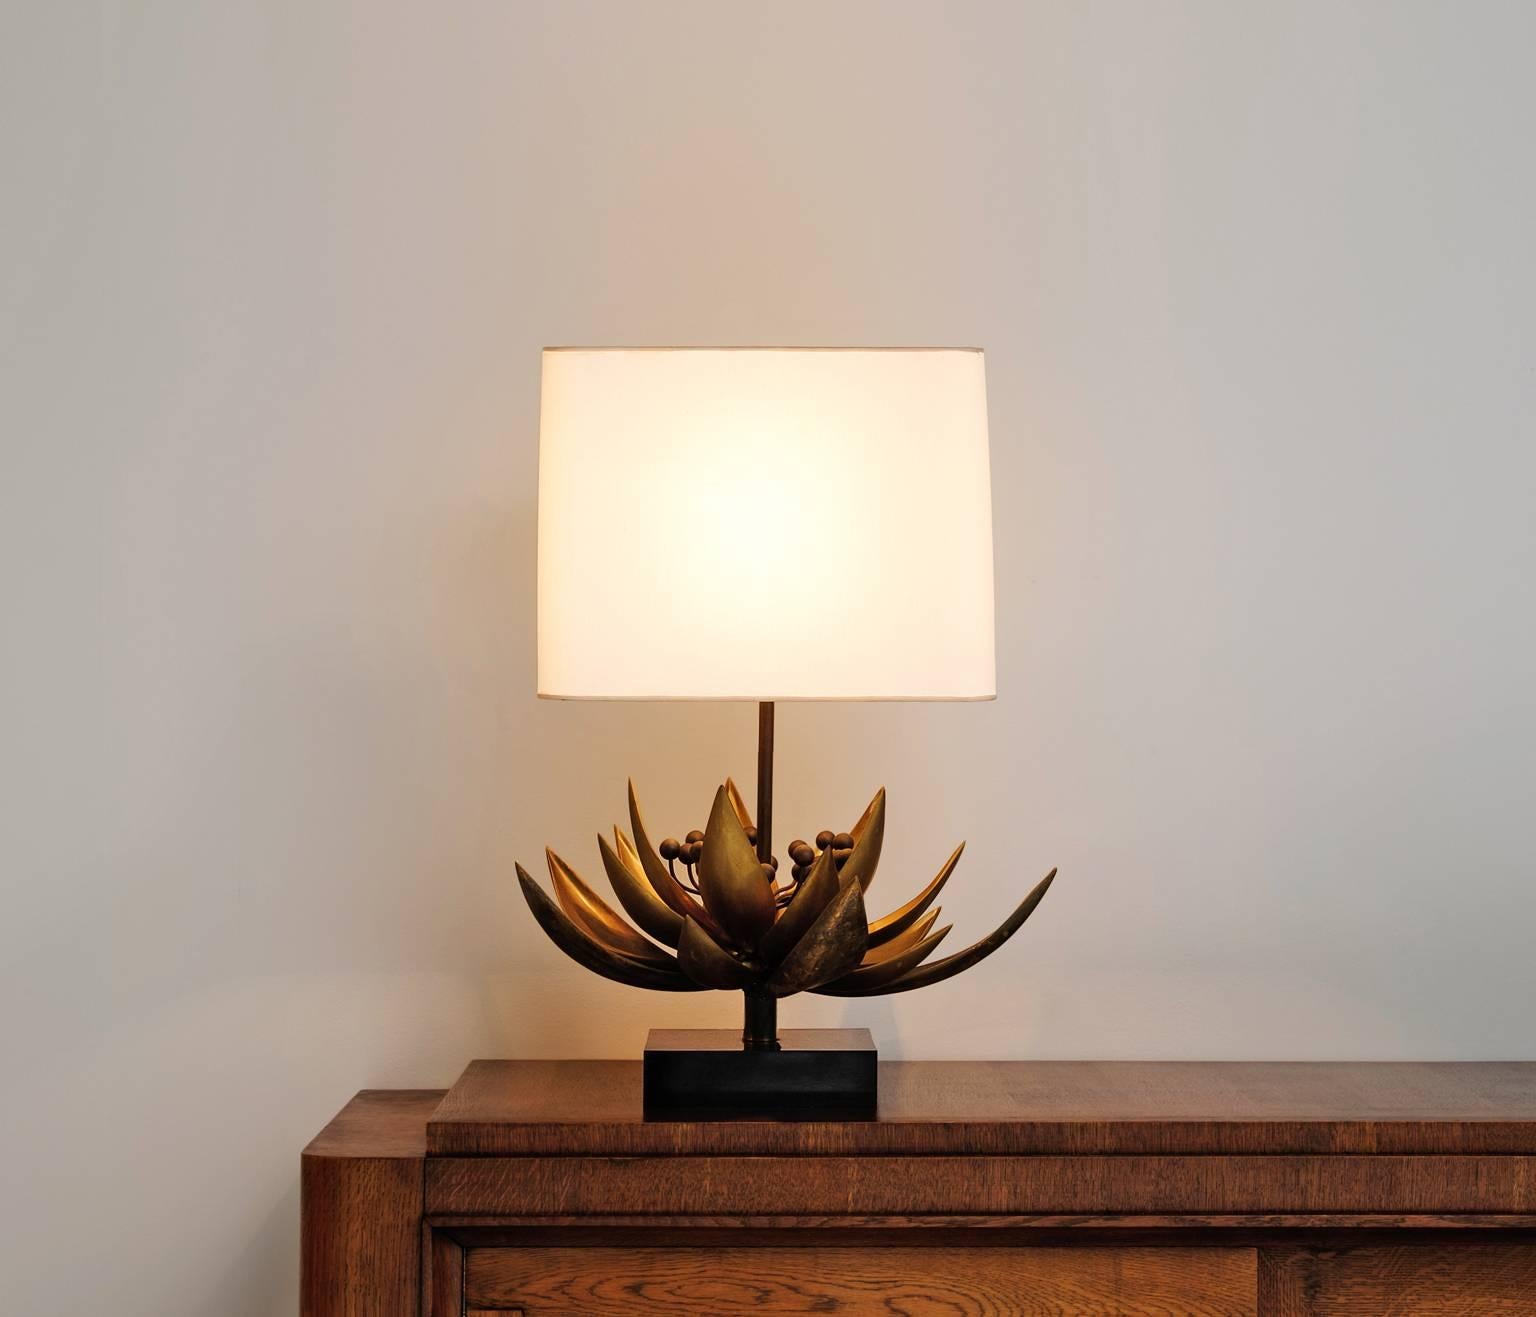 Floral table lamp in brass by Maison Jansen, France 1970s. 
Designed and signed by Christian Techoueyres. 

Table lamp with white shade. The stern of the lamp is decorated with a brass flower. The brass makes a nice contrast to the stone base.